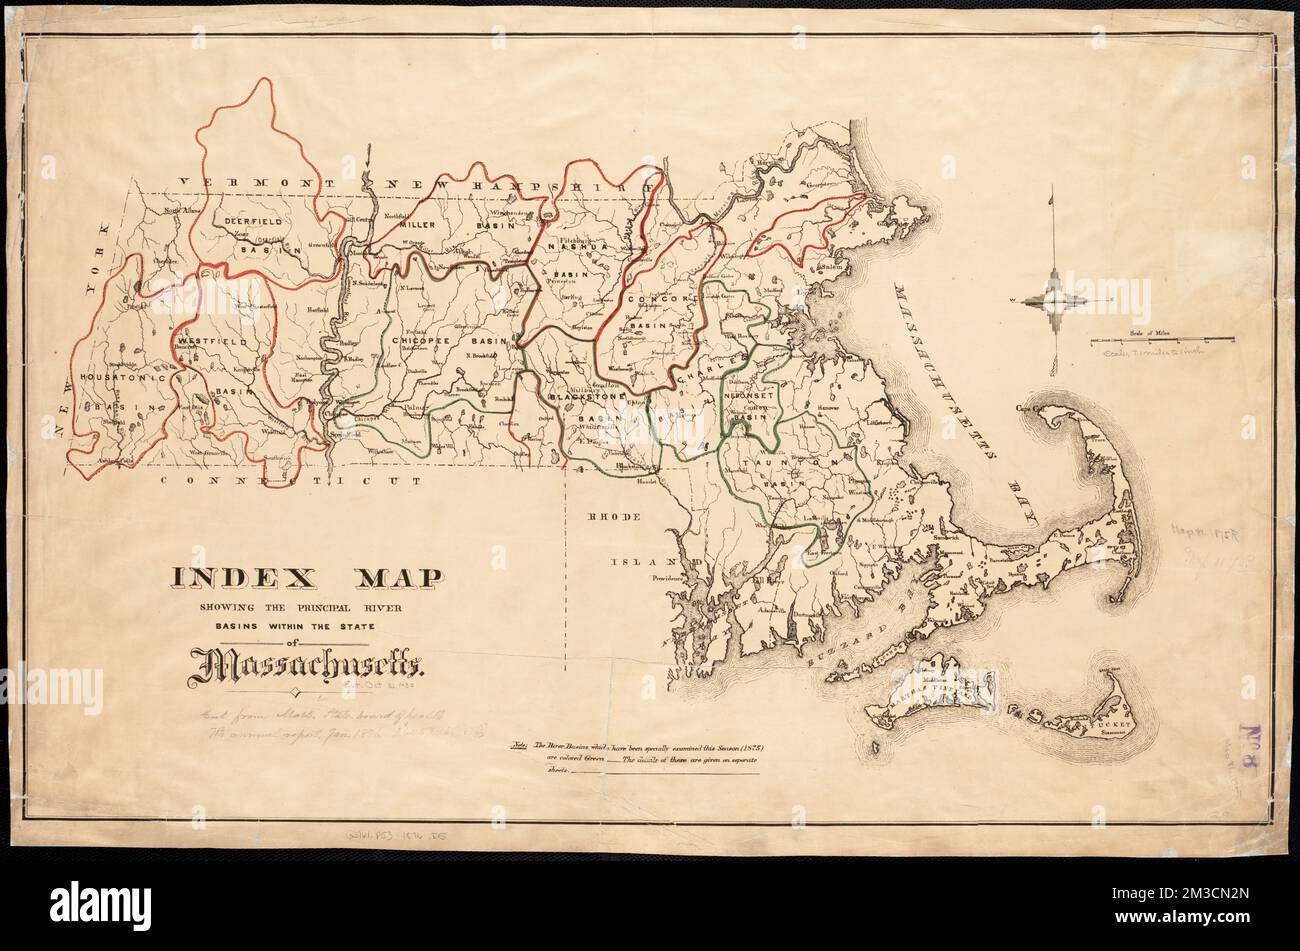 Index map showing the principal river basins within the state of ...